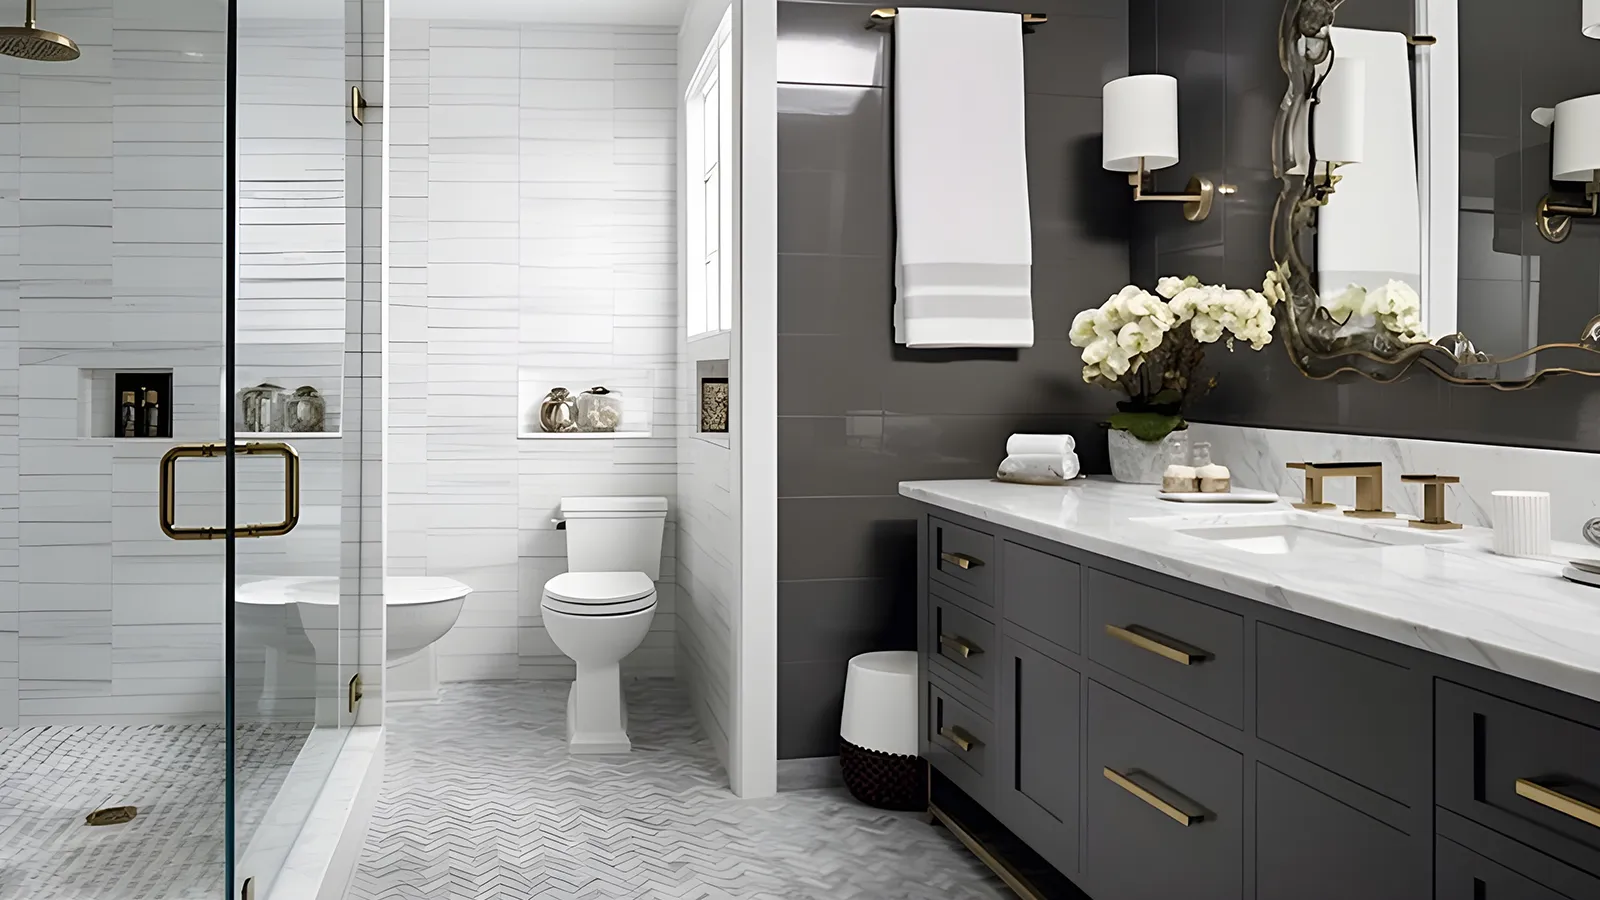 A bathroom with gray walls and gold accents.